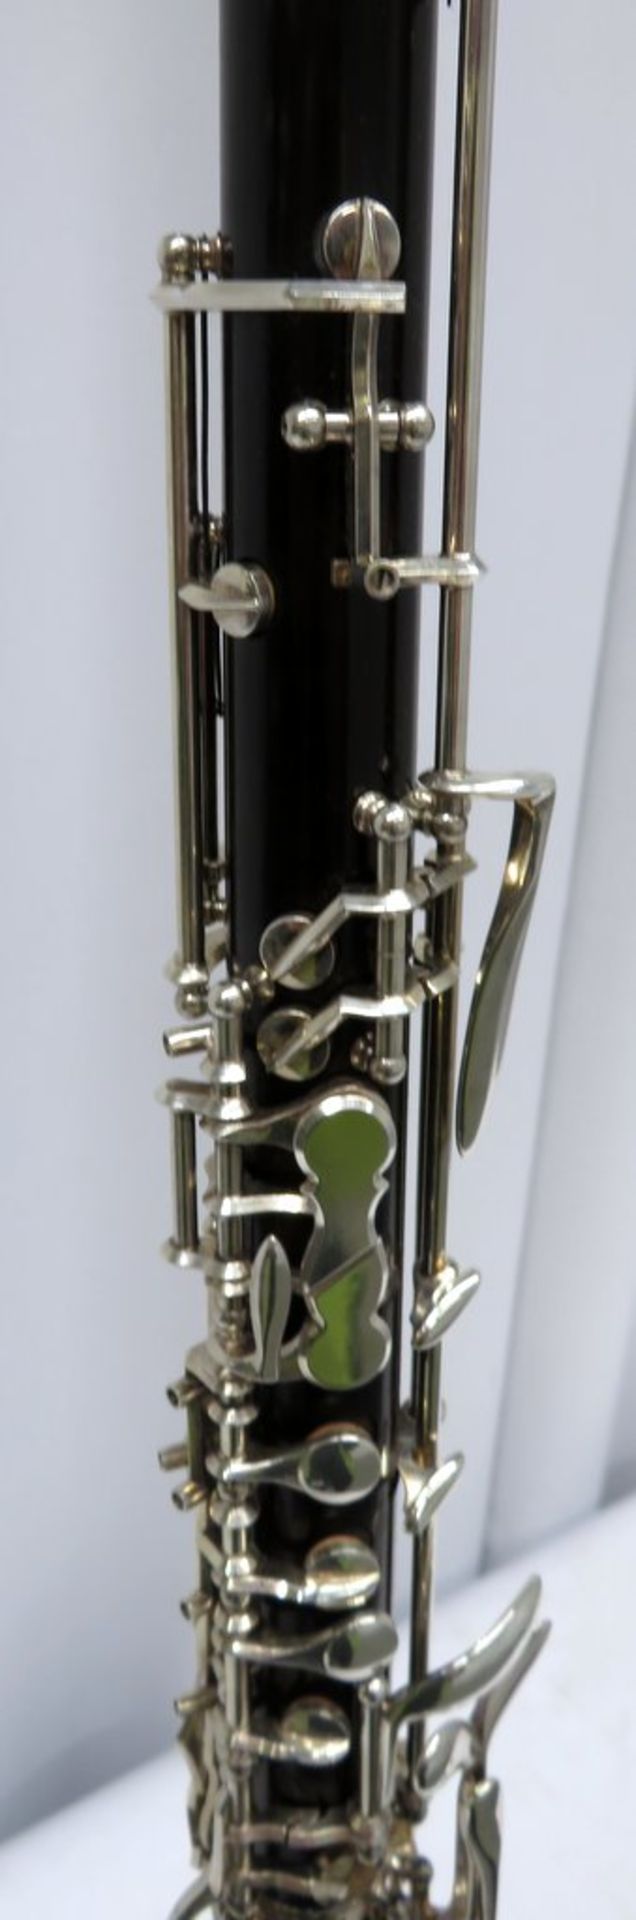 Howarth Cor Anglais S20C With Case. Serial Number: D0521. Please Note That This Item Has N - Image 7 of 19